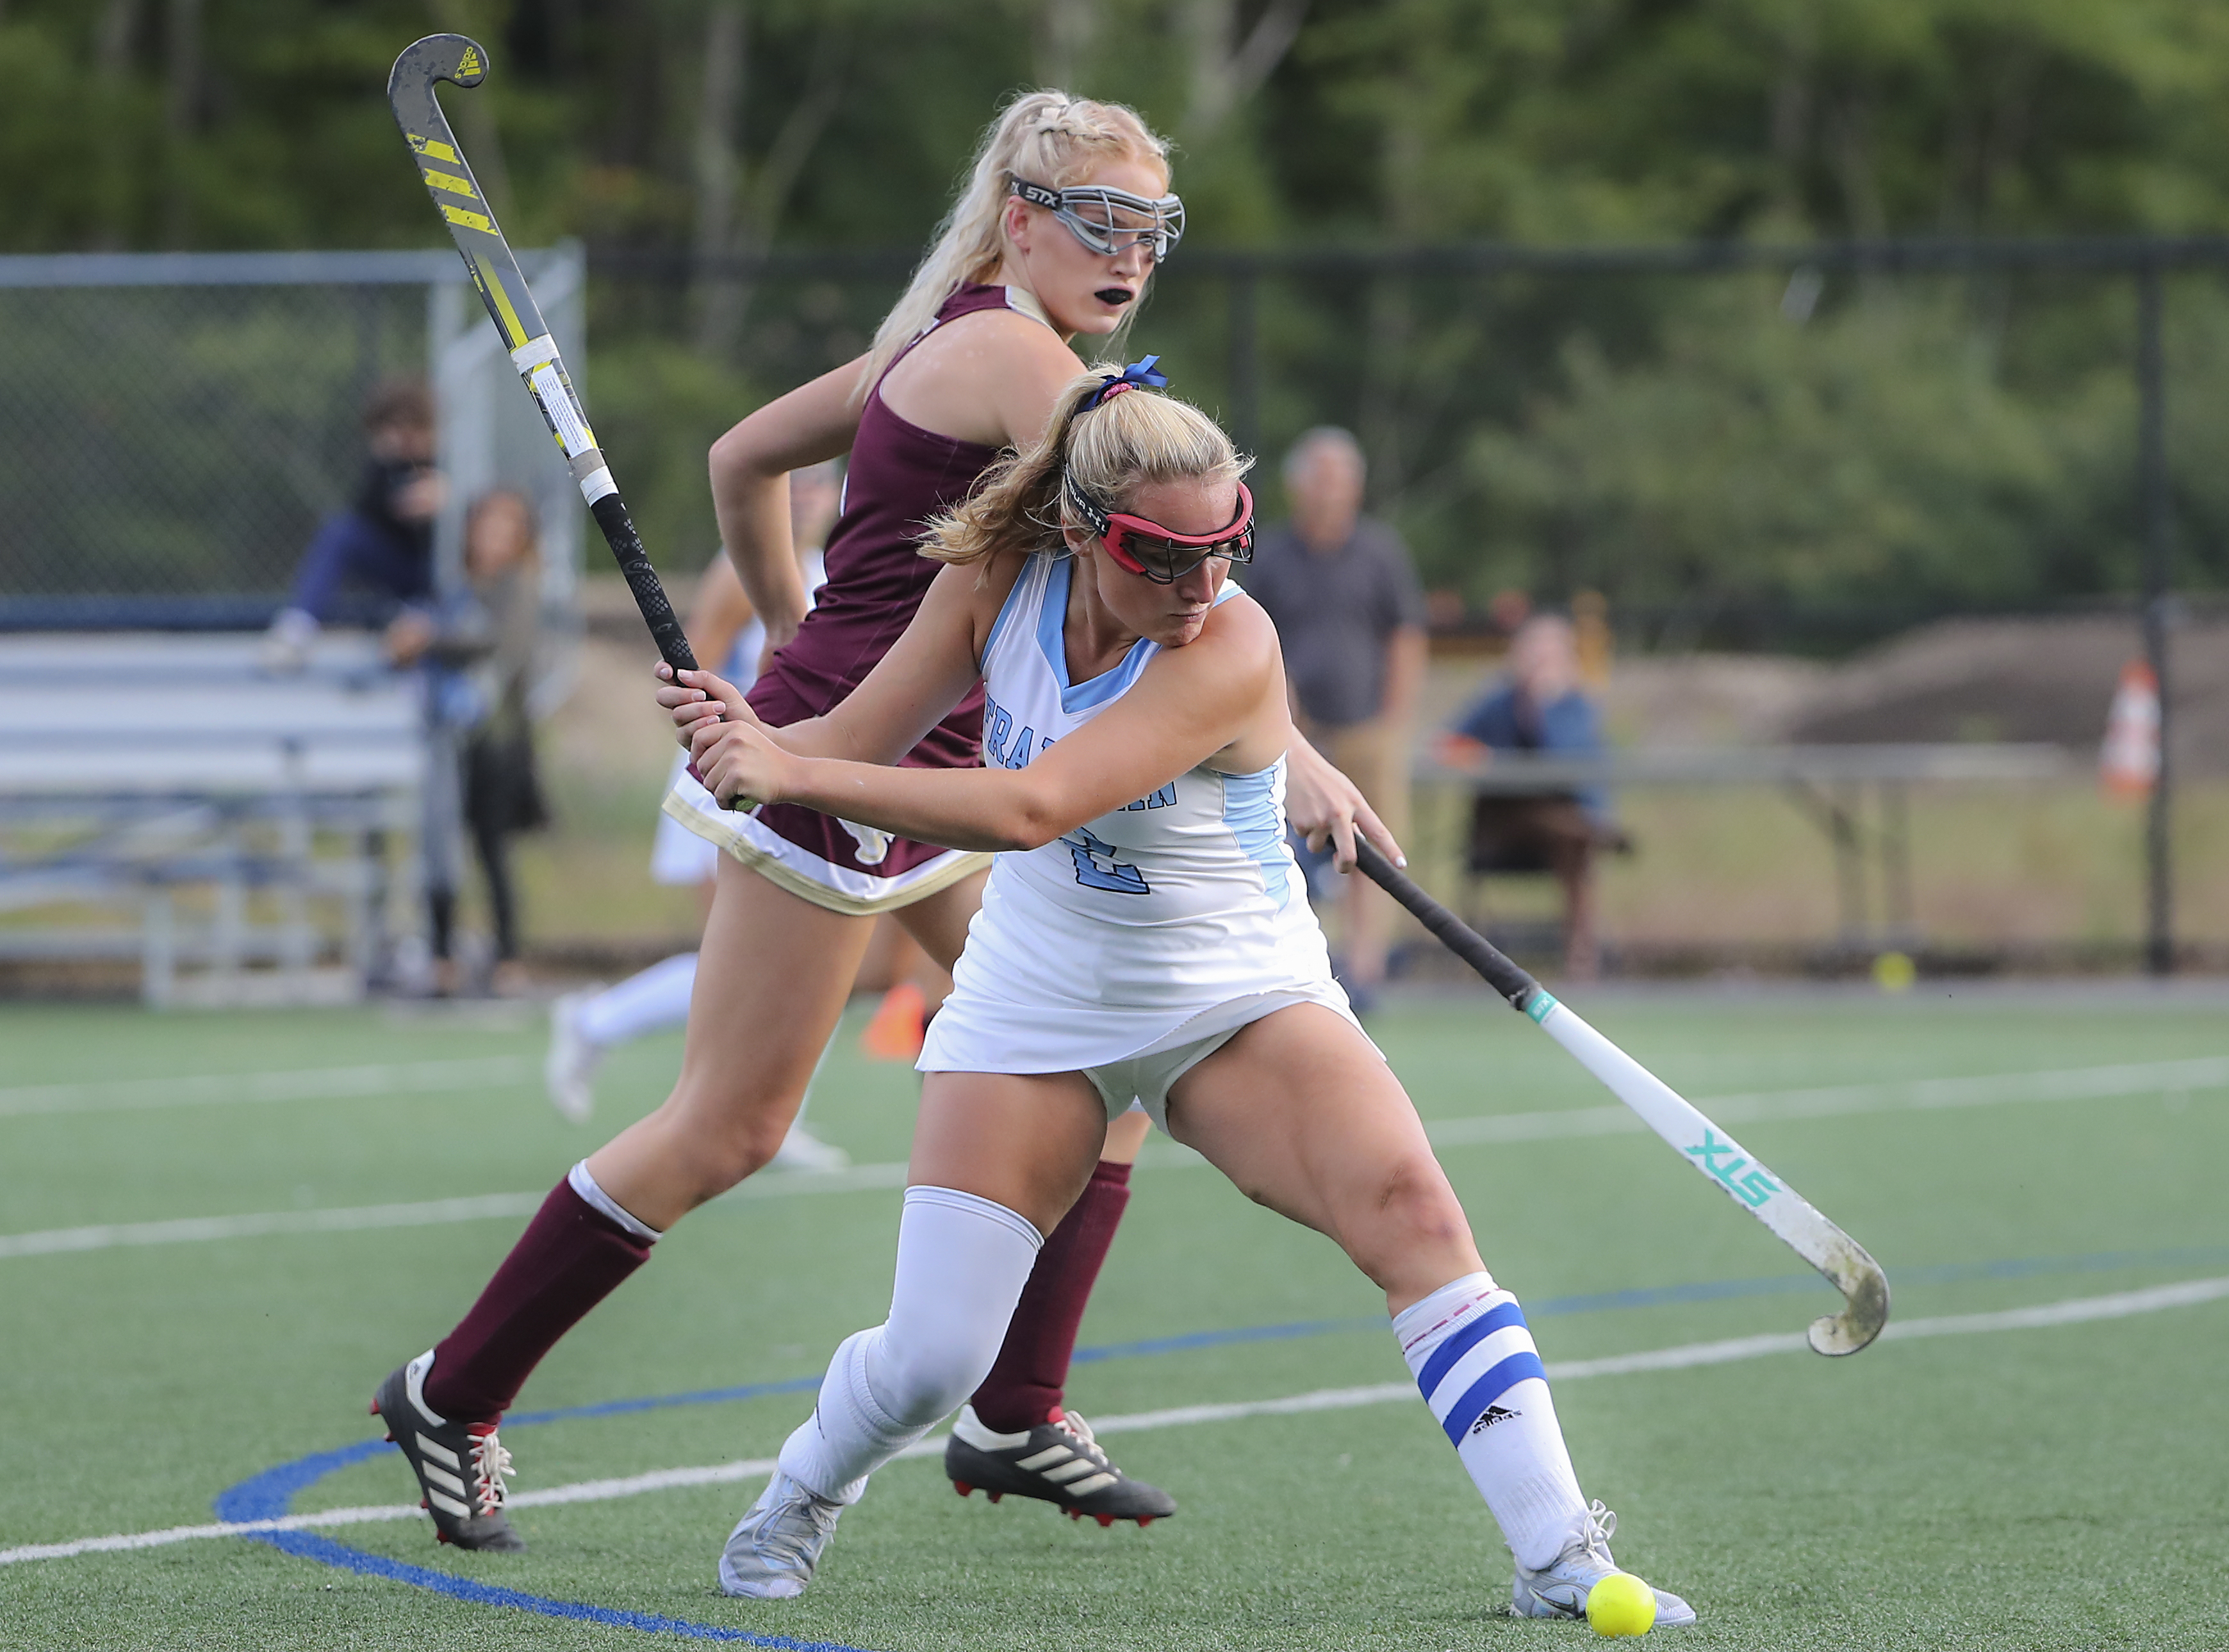 BU Field Hockey on X: Our featured newcomer for today is Brooklyn